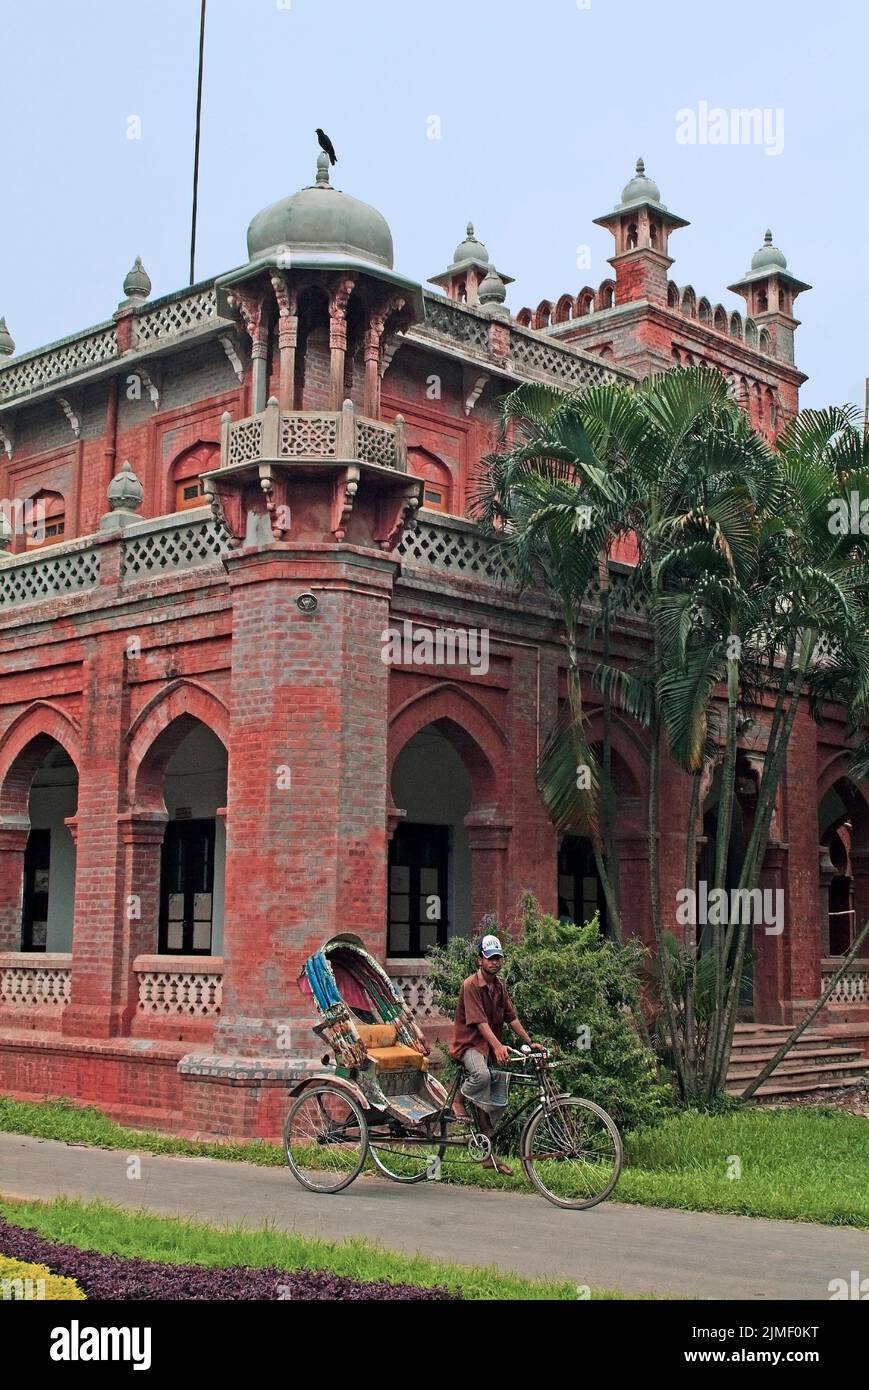 Dhaka, Bangladesh - September 17, 2007: Rickshaw driver waits for customers at the former residence of Lord Curzon - currently part of the University Stock Photo